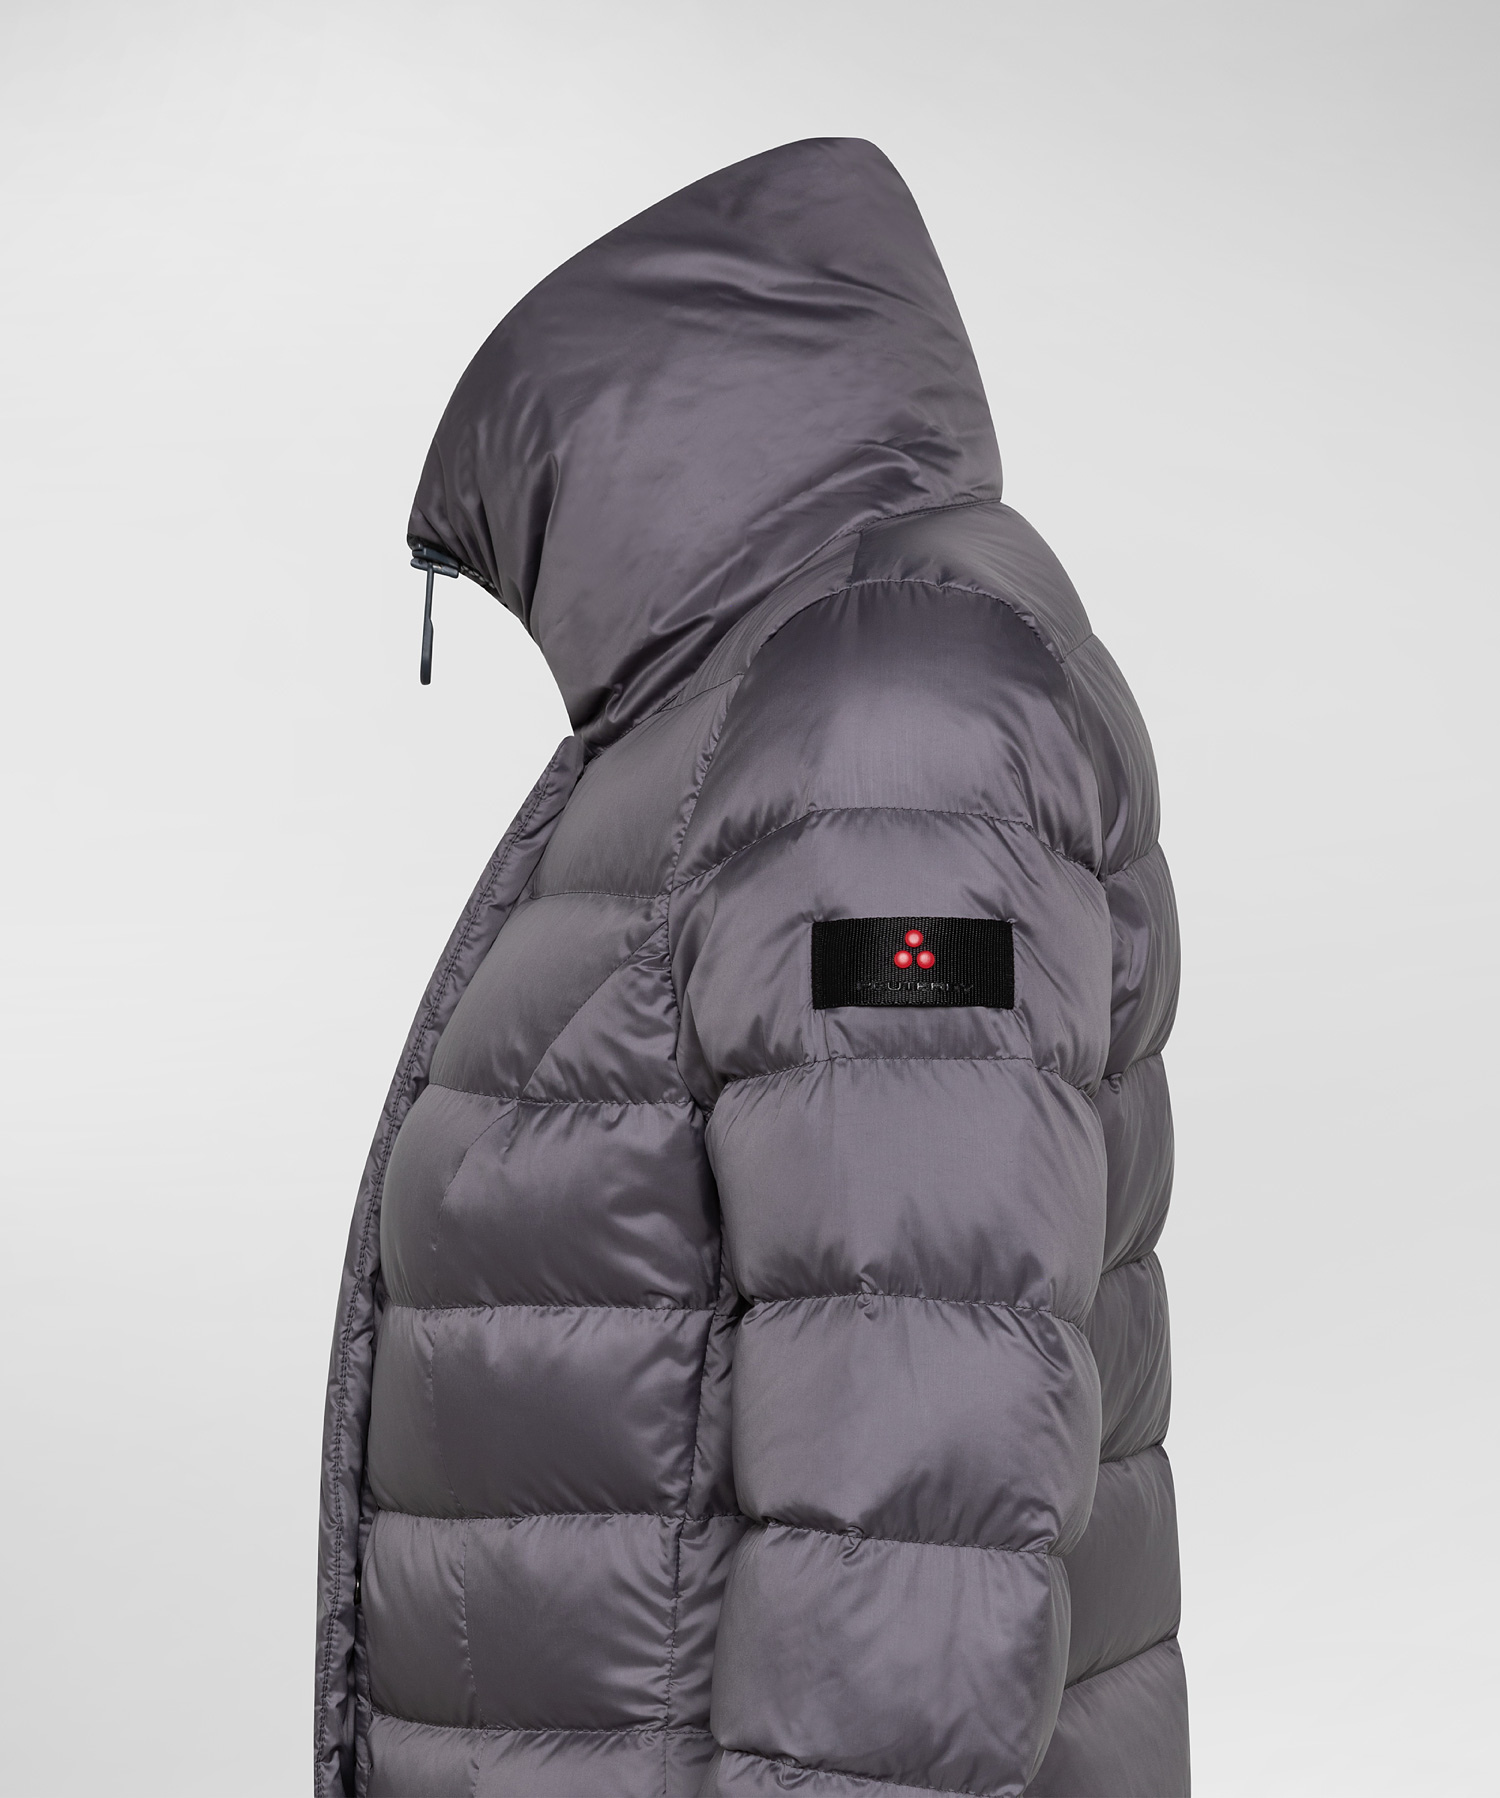 Down jacket with high collar for women, grey | Peuterey